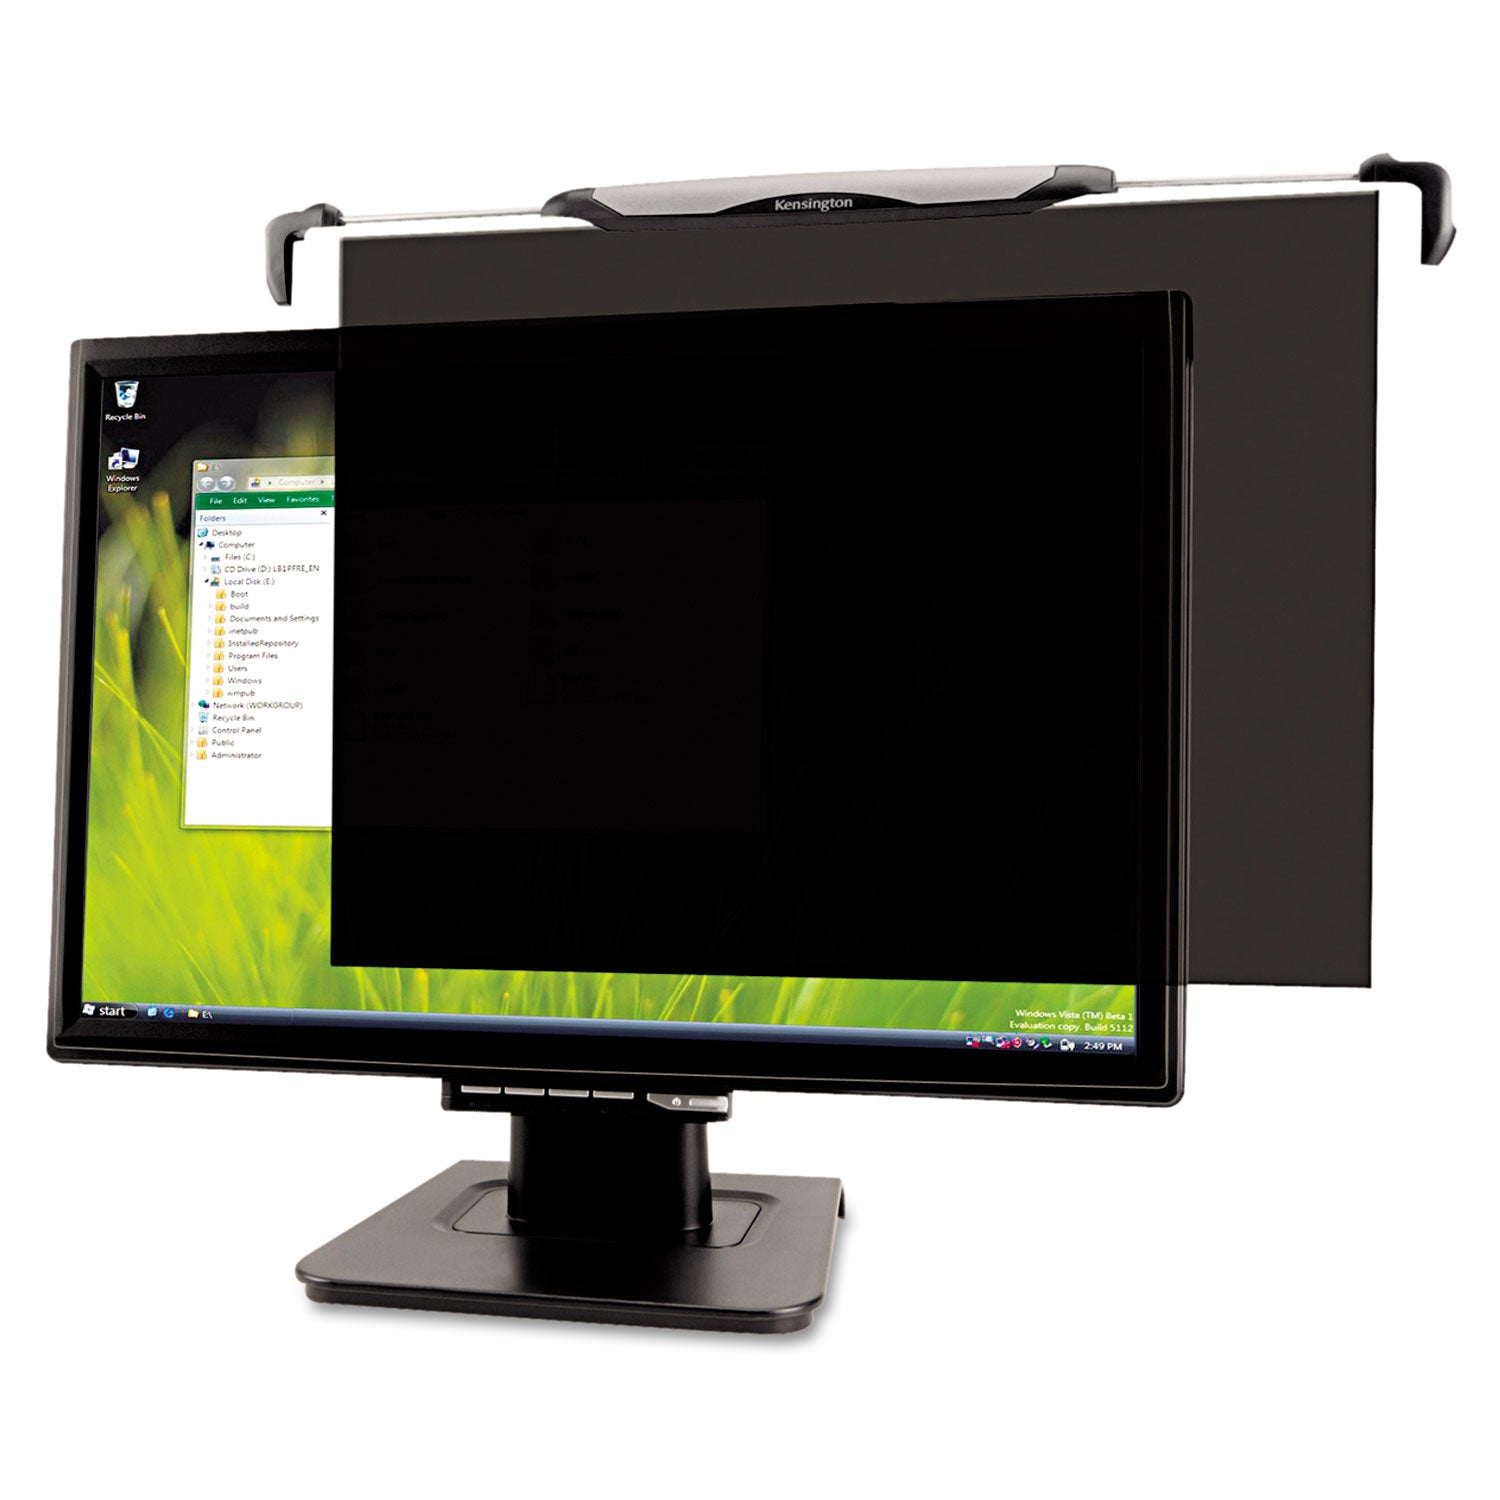 Snap 2 Flat Panel Privacy Filter for 20" to 22" Widescreen Flat Panel Monitor - 